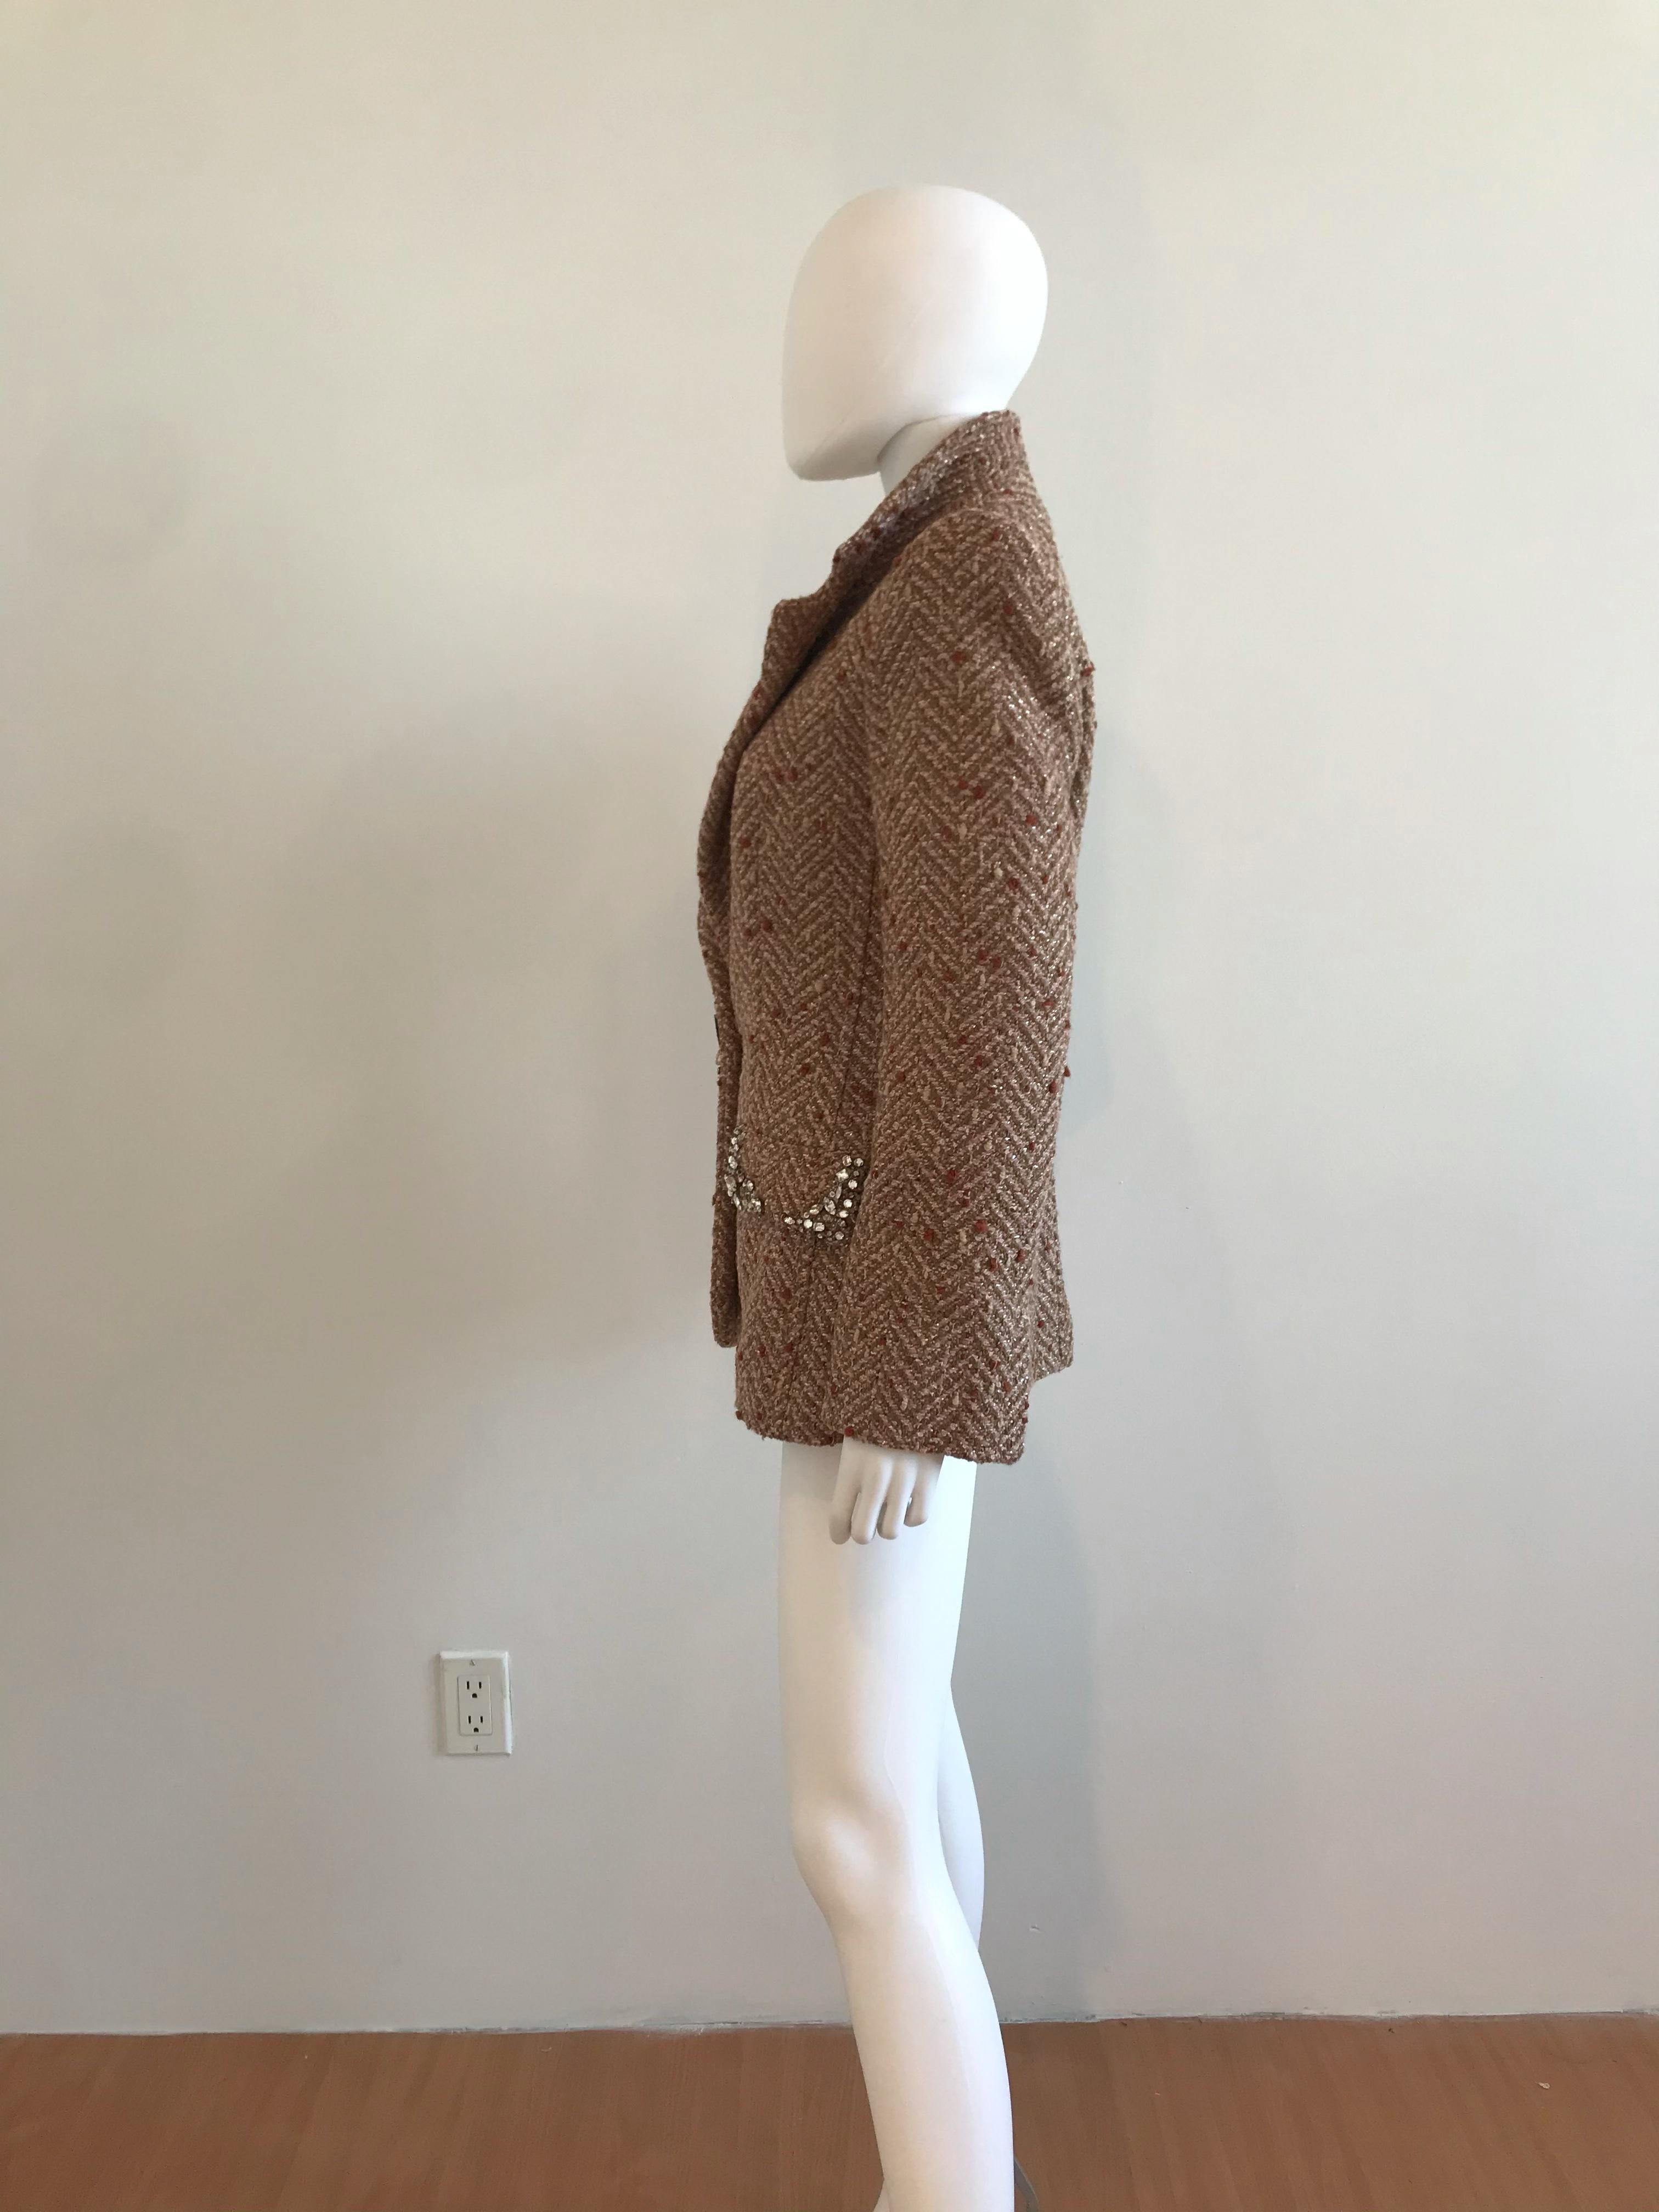 Gianfranco Ferre Boucle Blazer with Rhinestone Detailing on the pockets and front closure. Made in Italy. No size tag on the item but it is estimated to be approximately a size 4-6. Silk Lining.